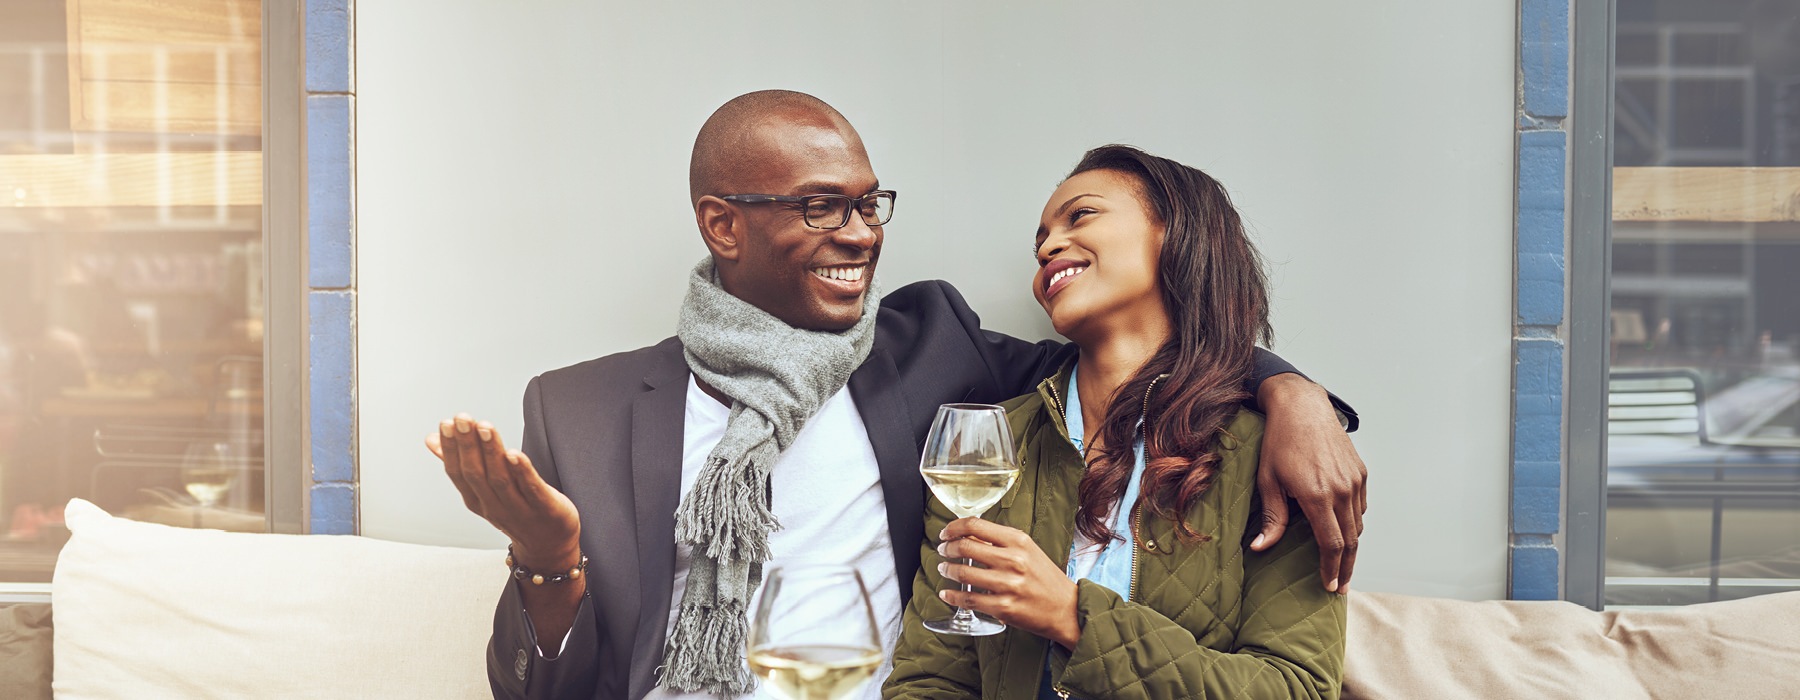 smiling couple drinking wine on an outdoor sofa